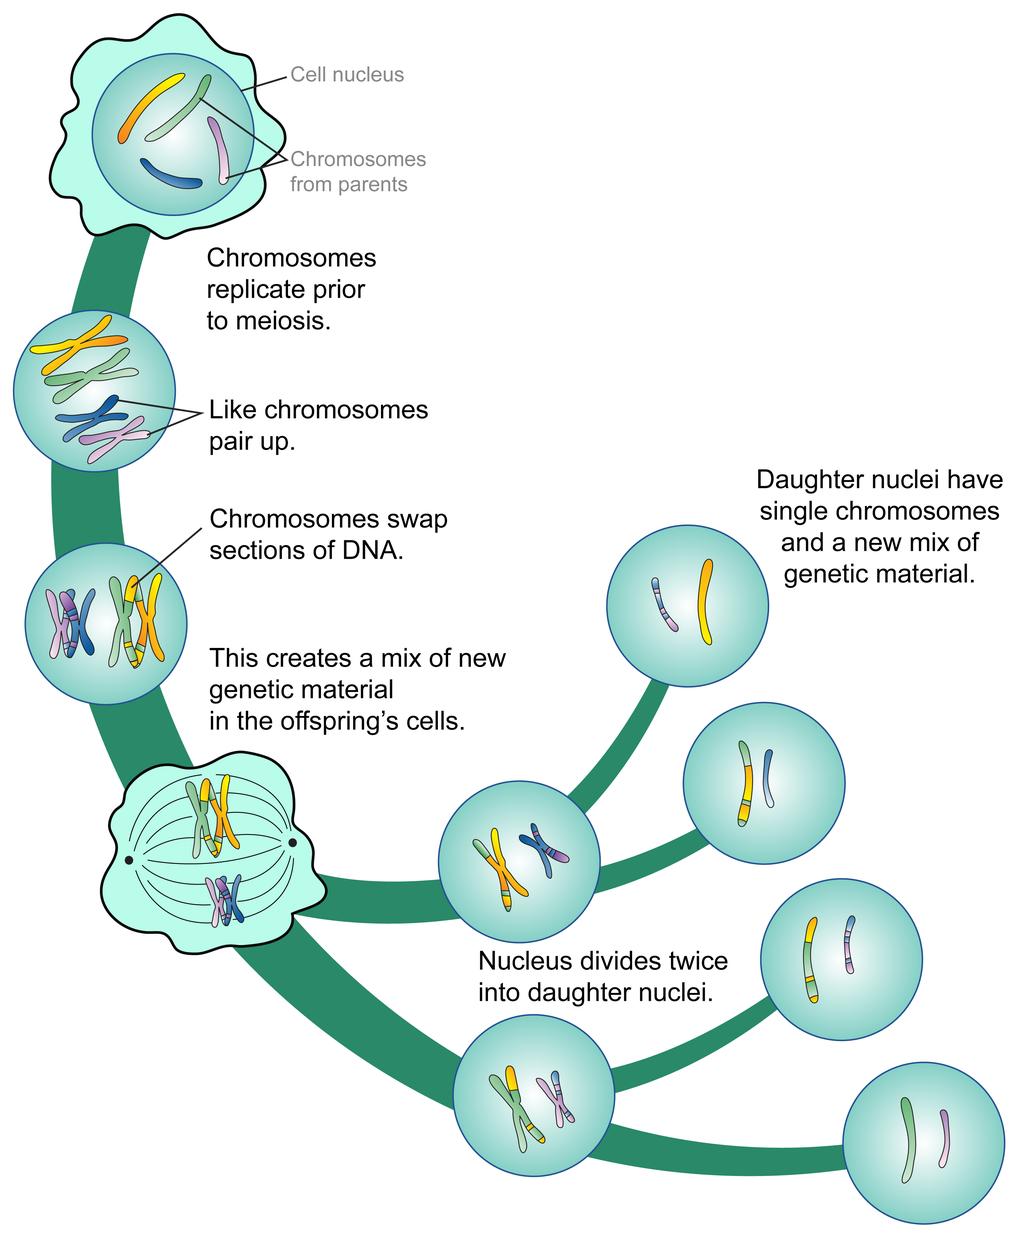 FIGURE 5.18 Phases of Meiosis. This flowchart of meiosis shows meiosis I in greater detail than meiosis II. Meiosis I but not meiosis II differs somewhat from mitosis.